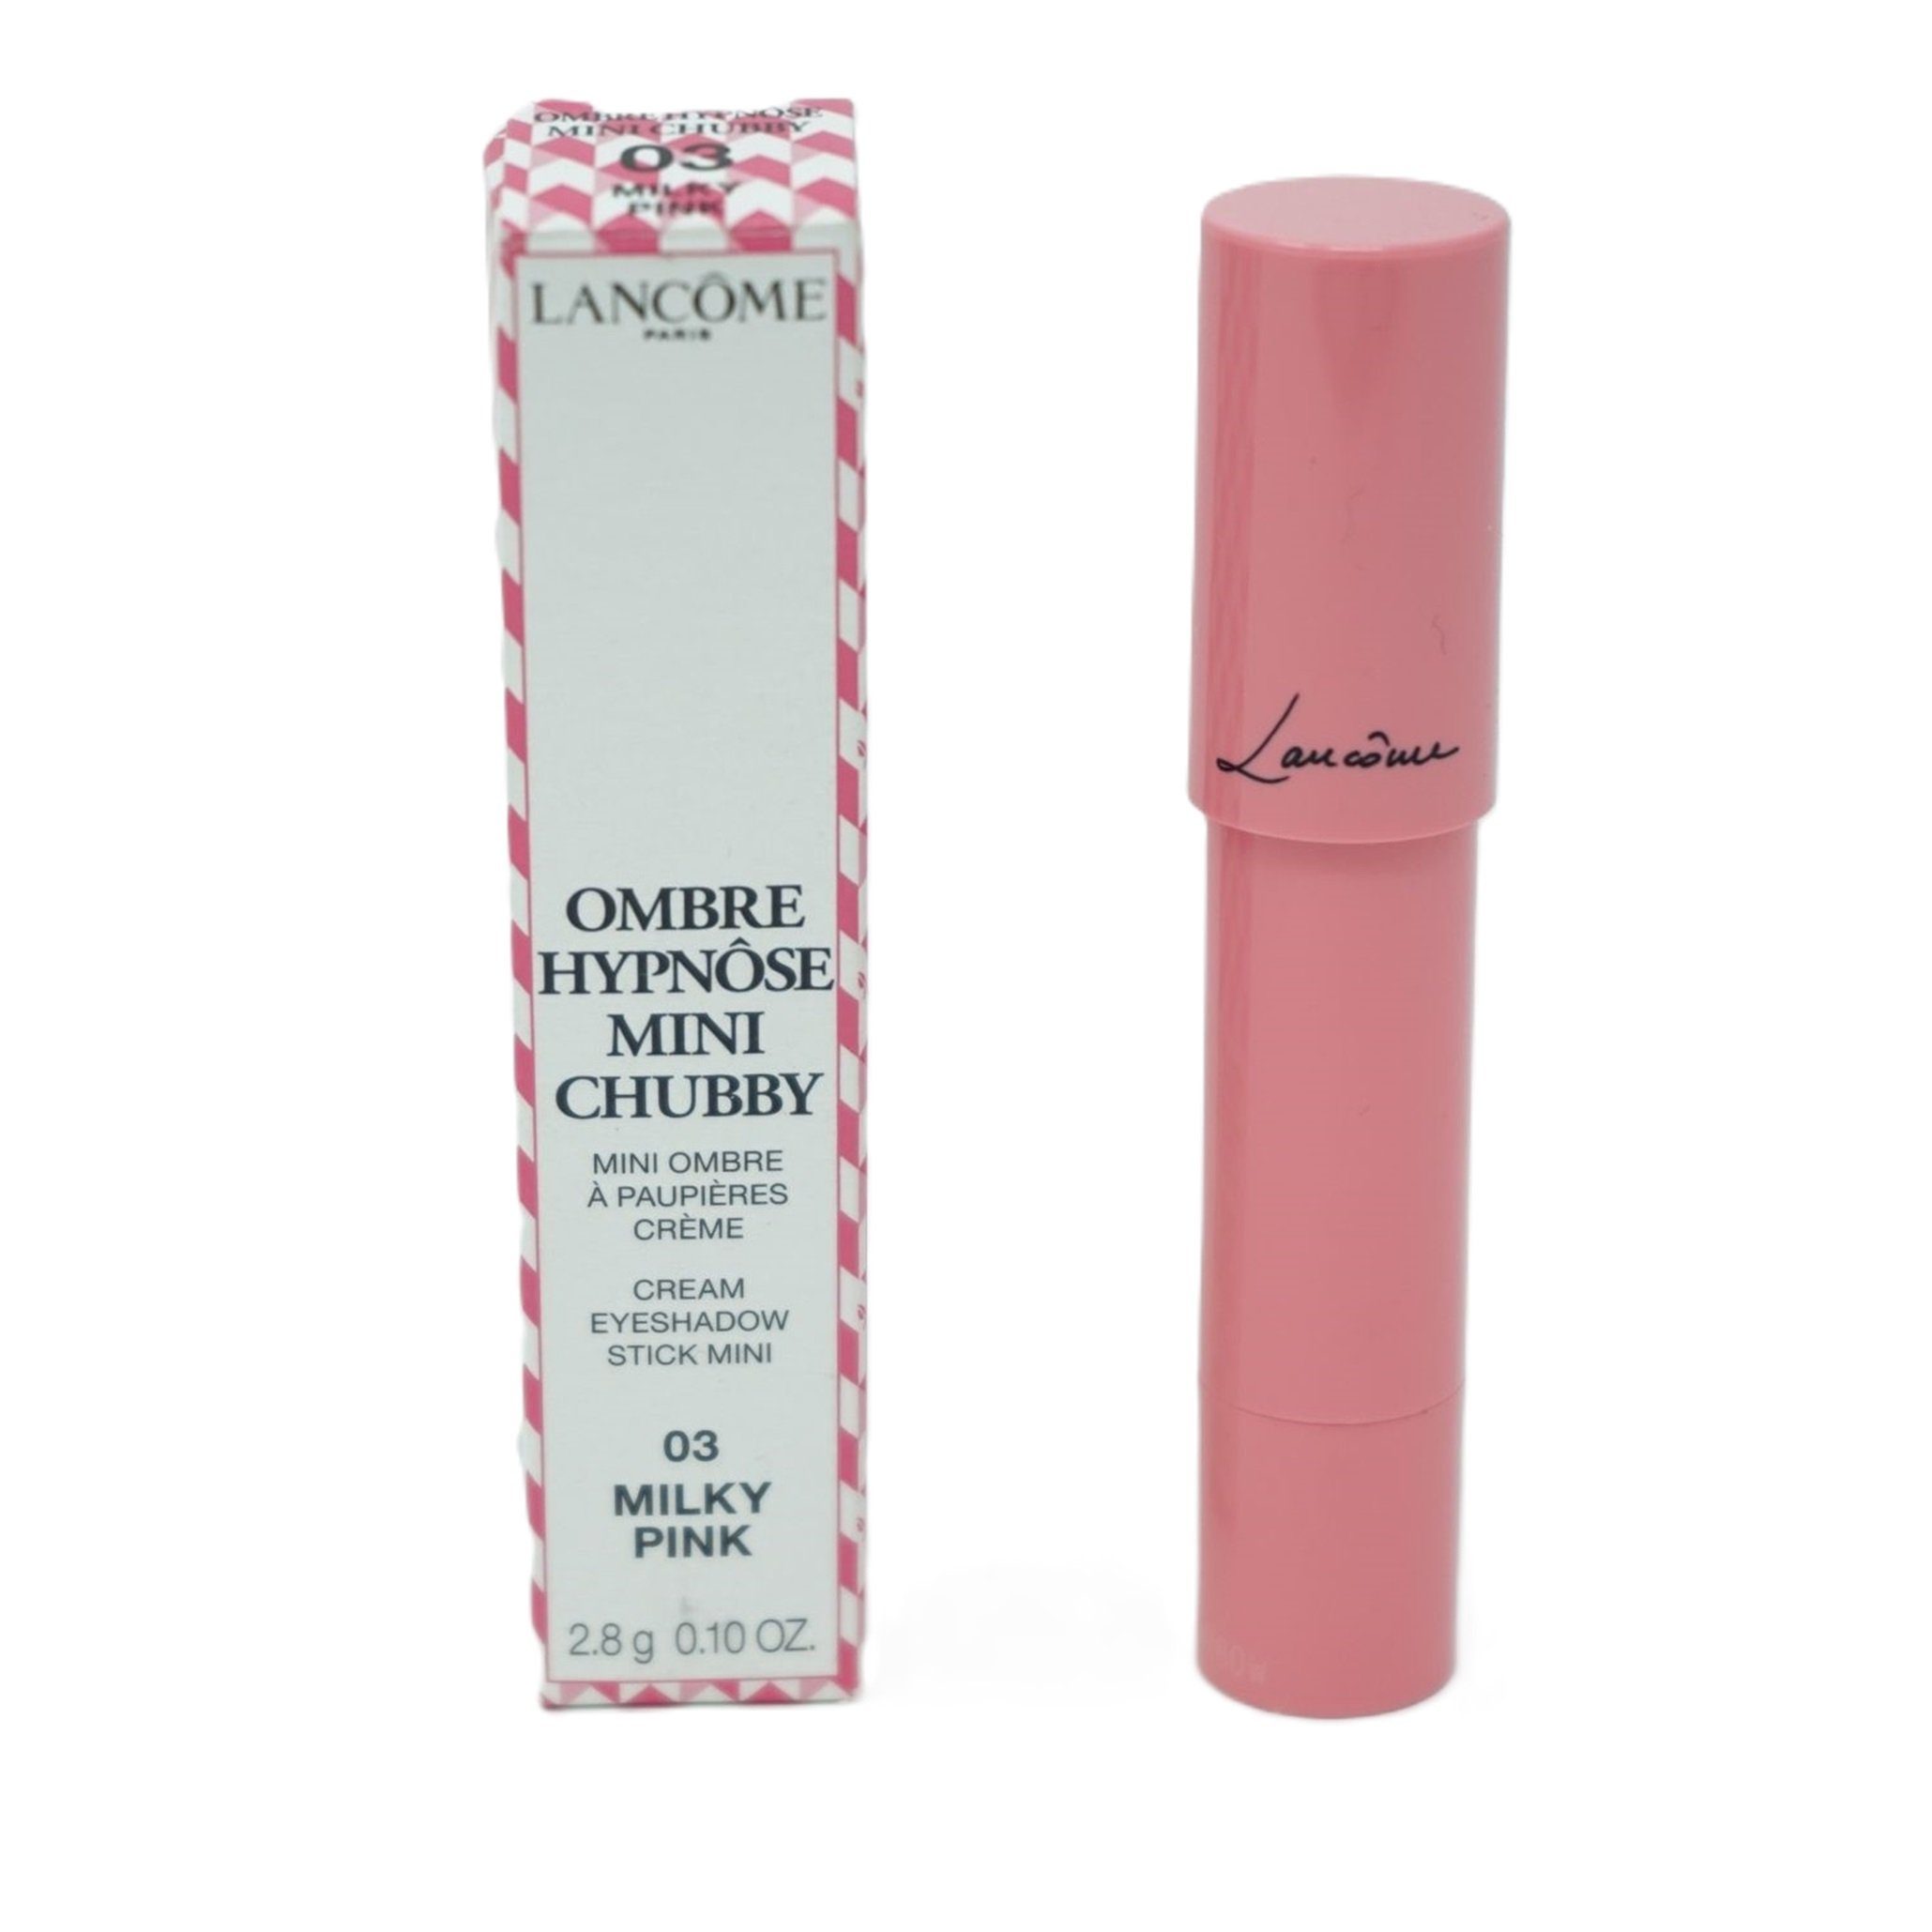 LANCOME Lidschatten lancome Ombre Hypnose Eyeshadow Stick 03 Milky Pink